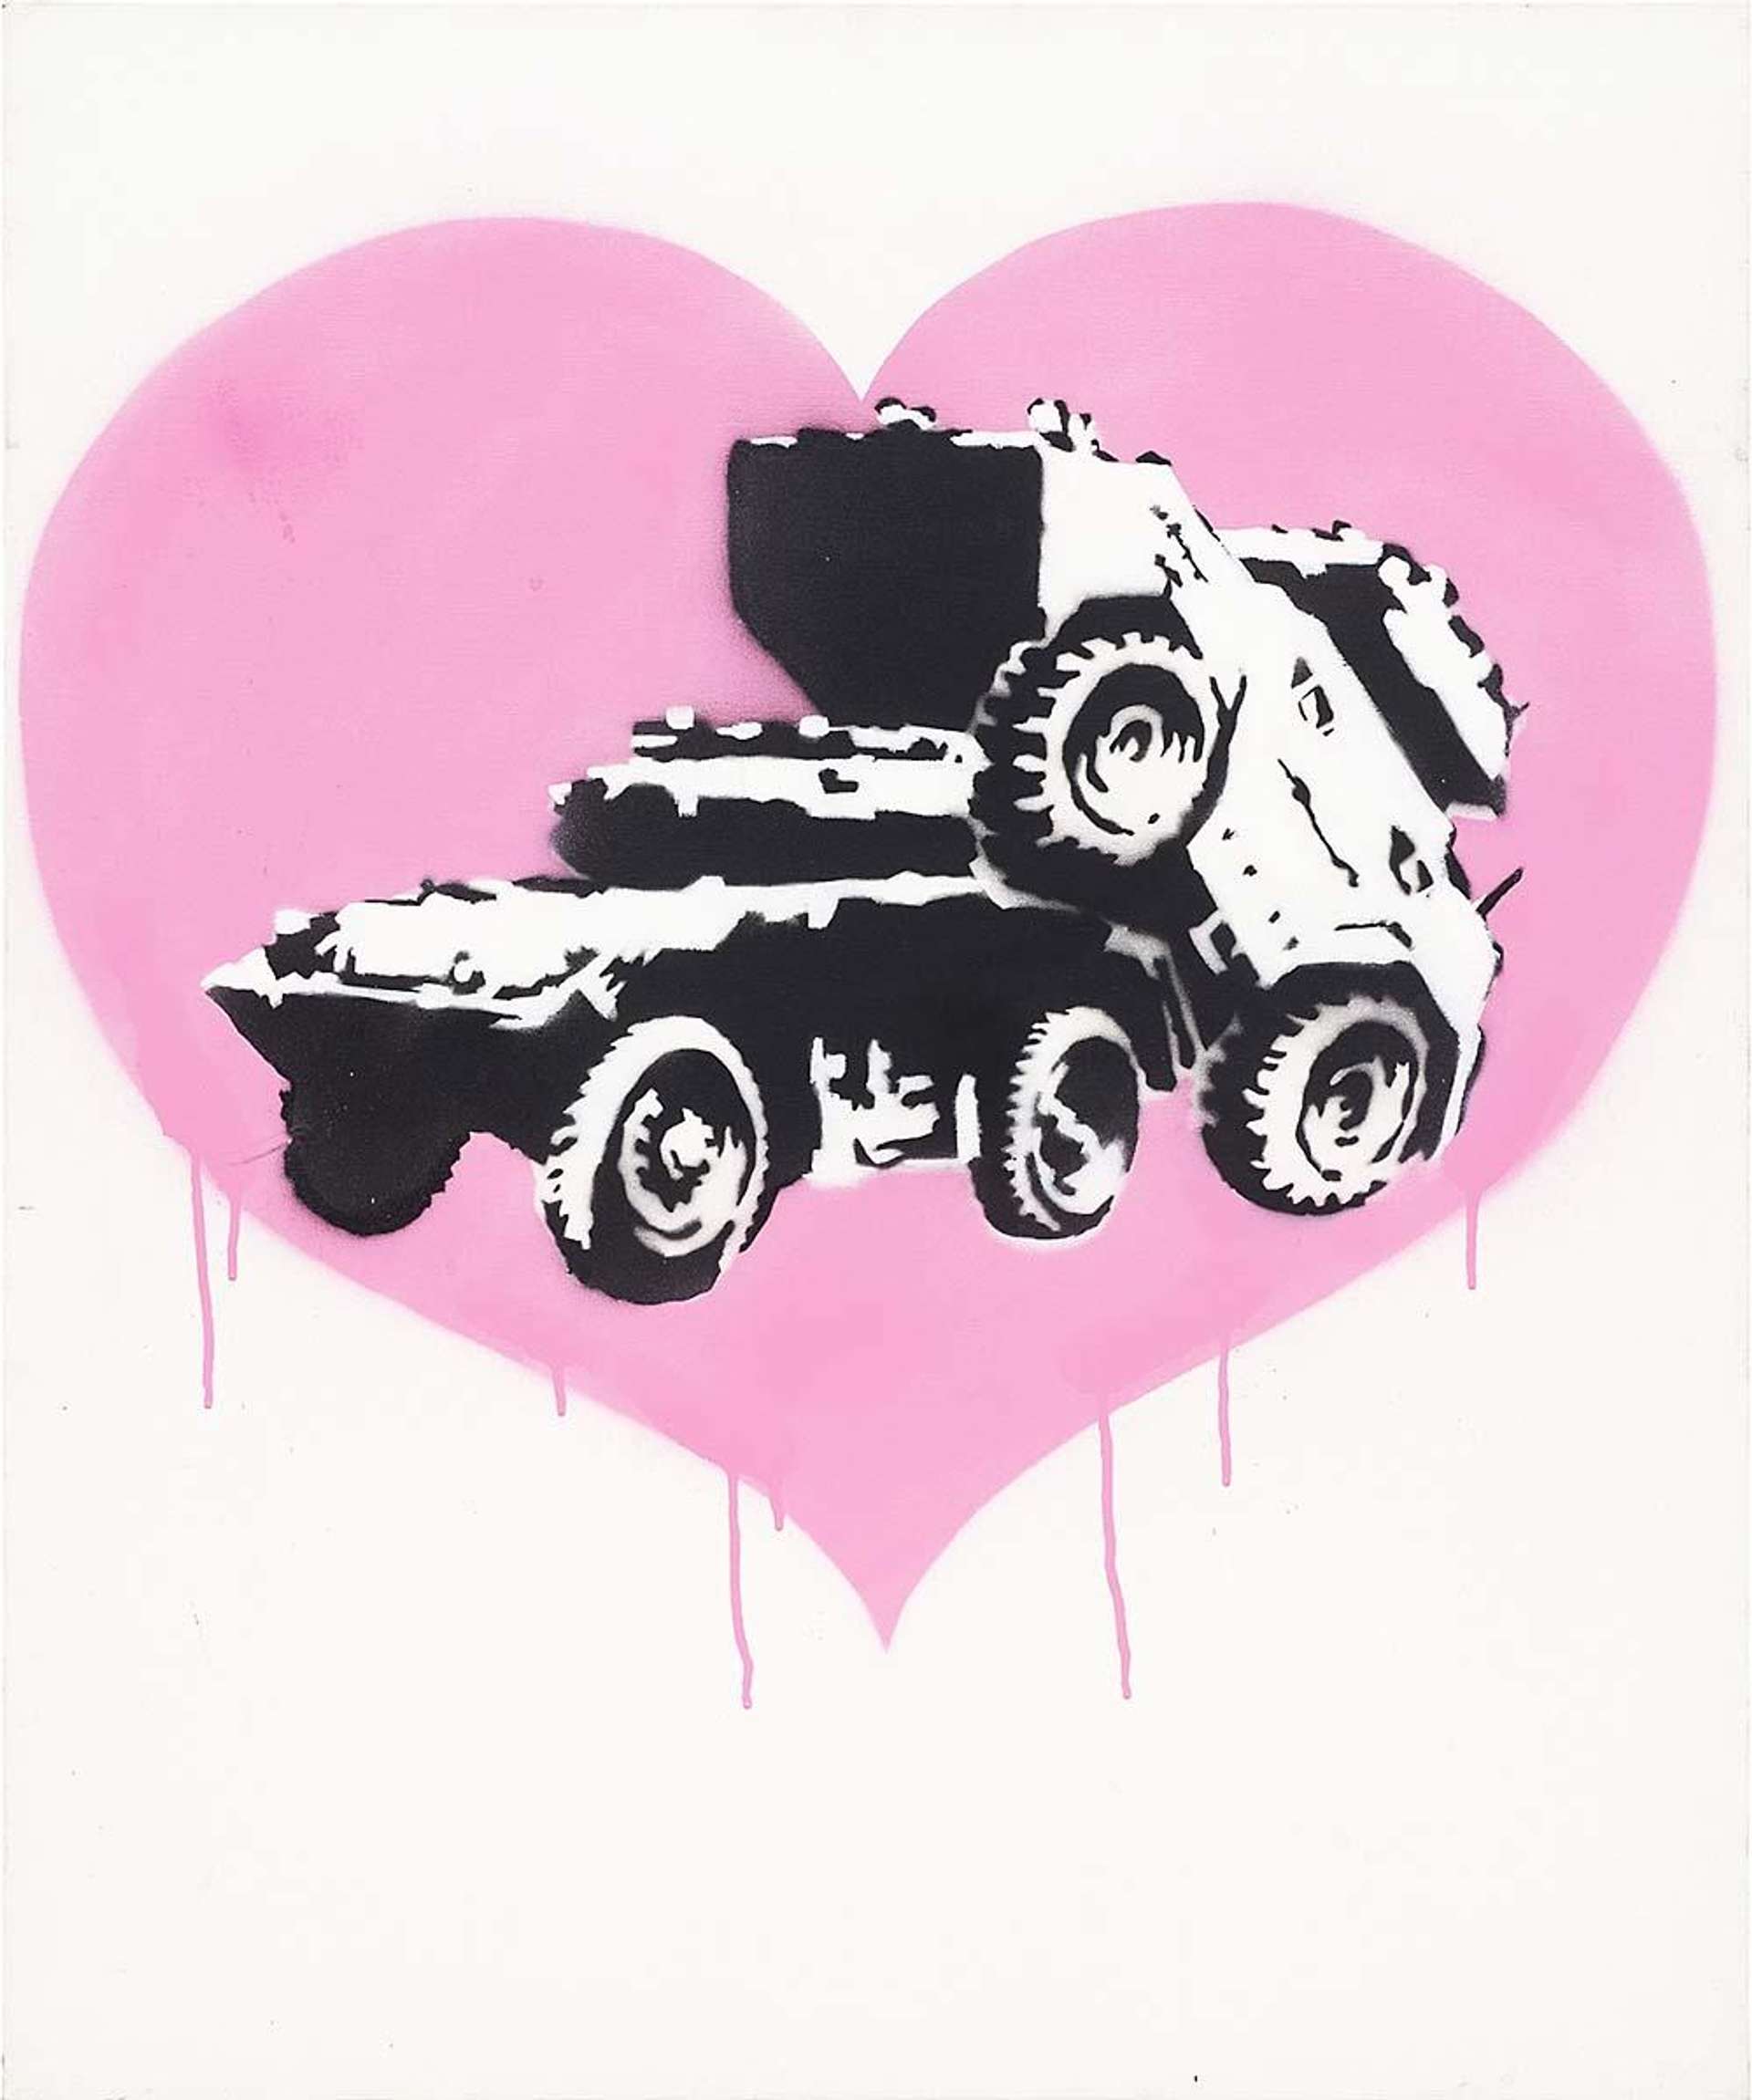 In front of a pink heart, two WWII-era tanks in black and white try to run one another over.